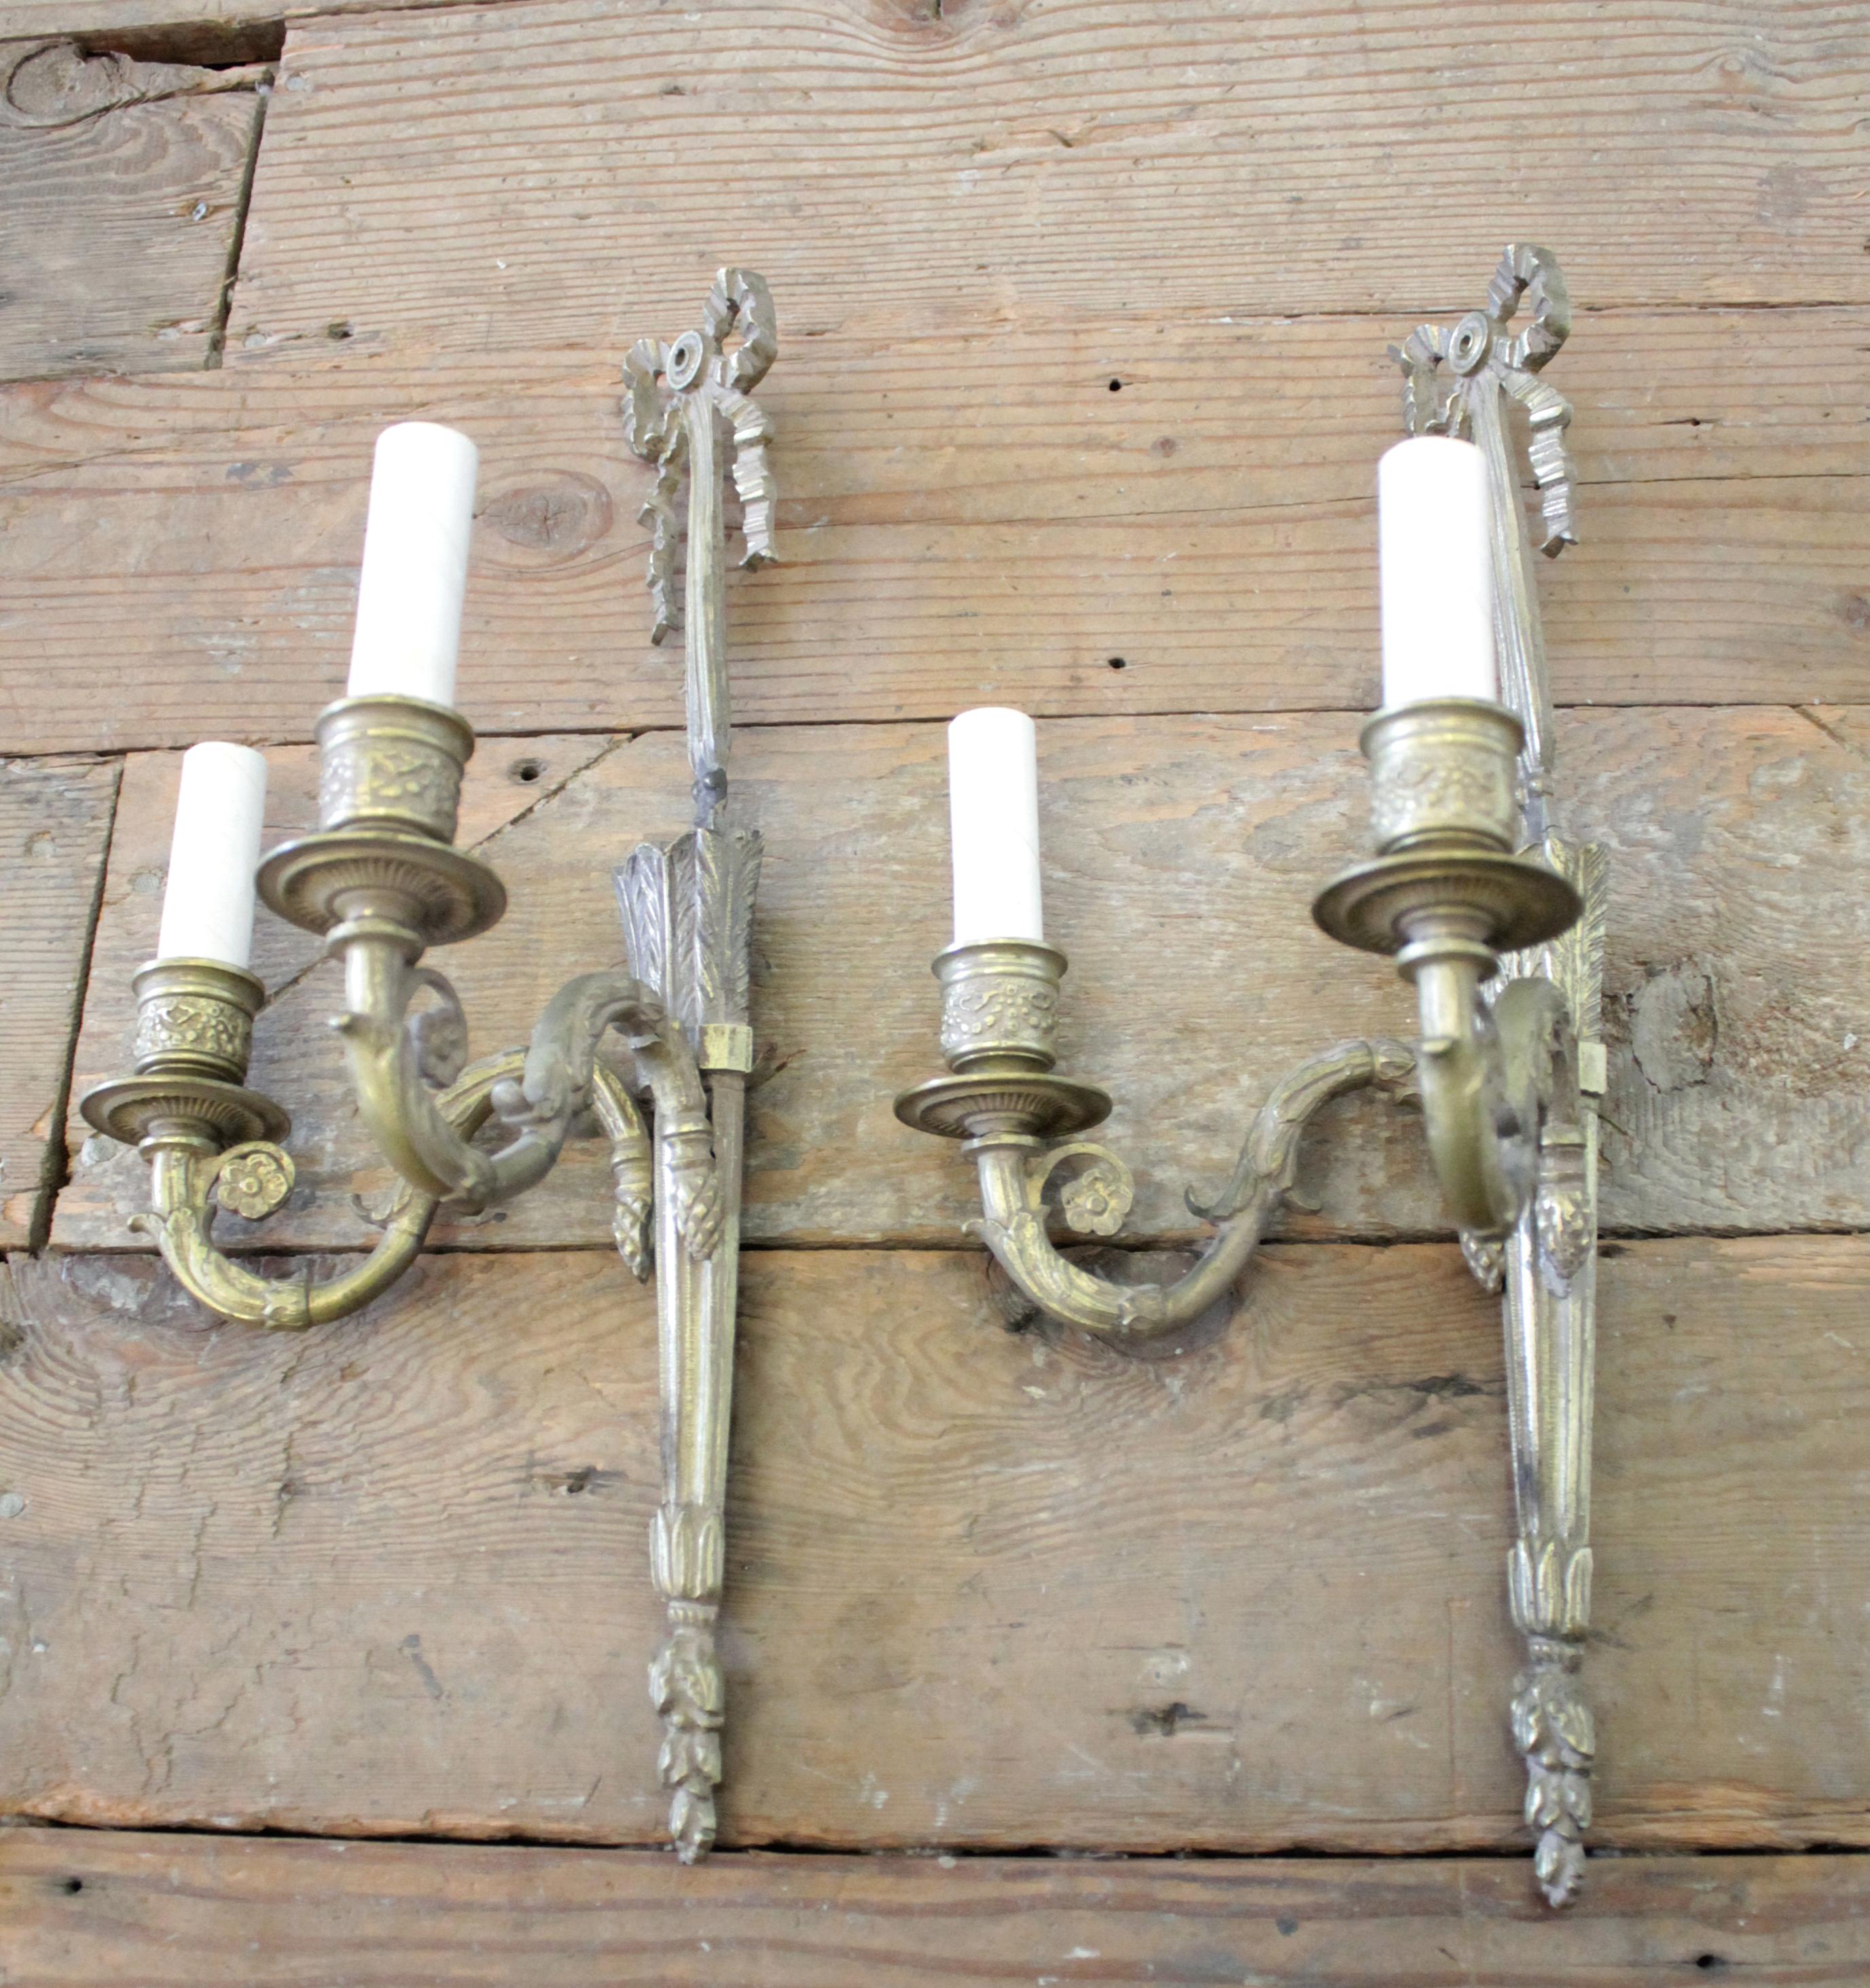 Vintage brass French style ribbon sconces with 2 lights.
Measures: 7.75